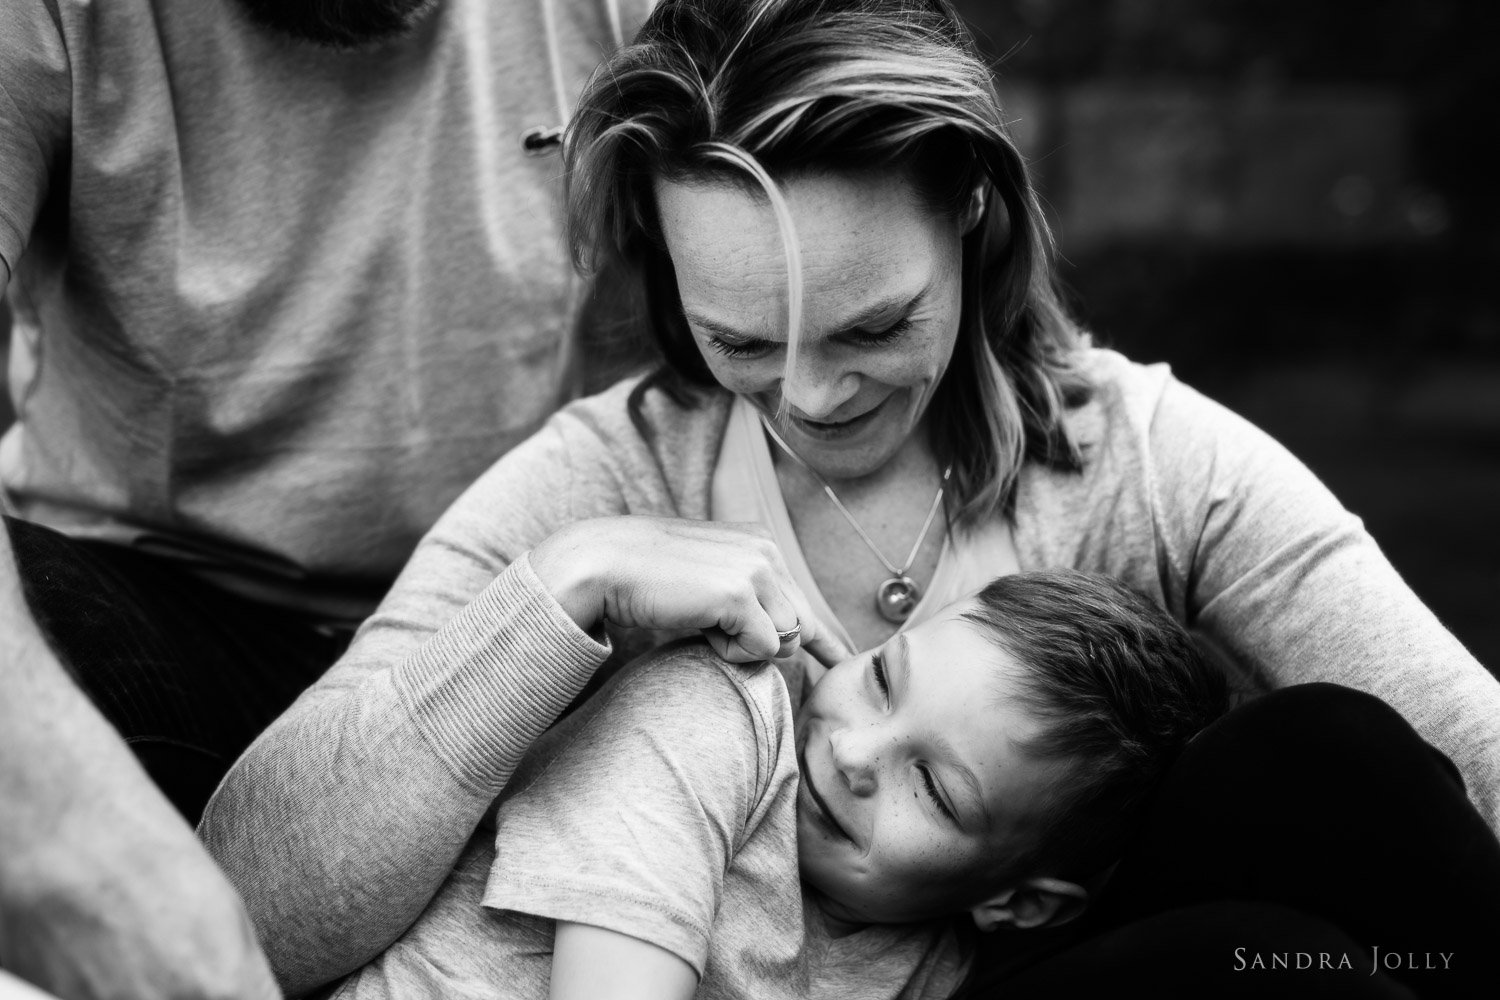 mother-and-son-portrait-by-sandra-jolly-photography.jpg